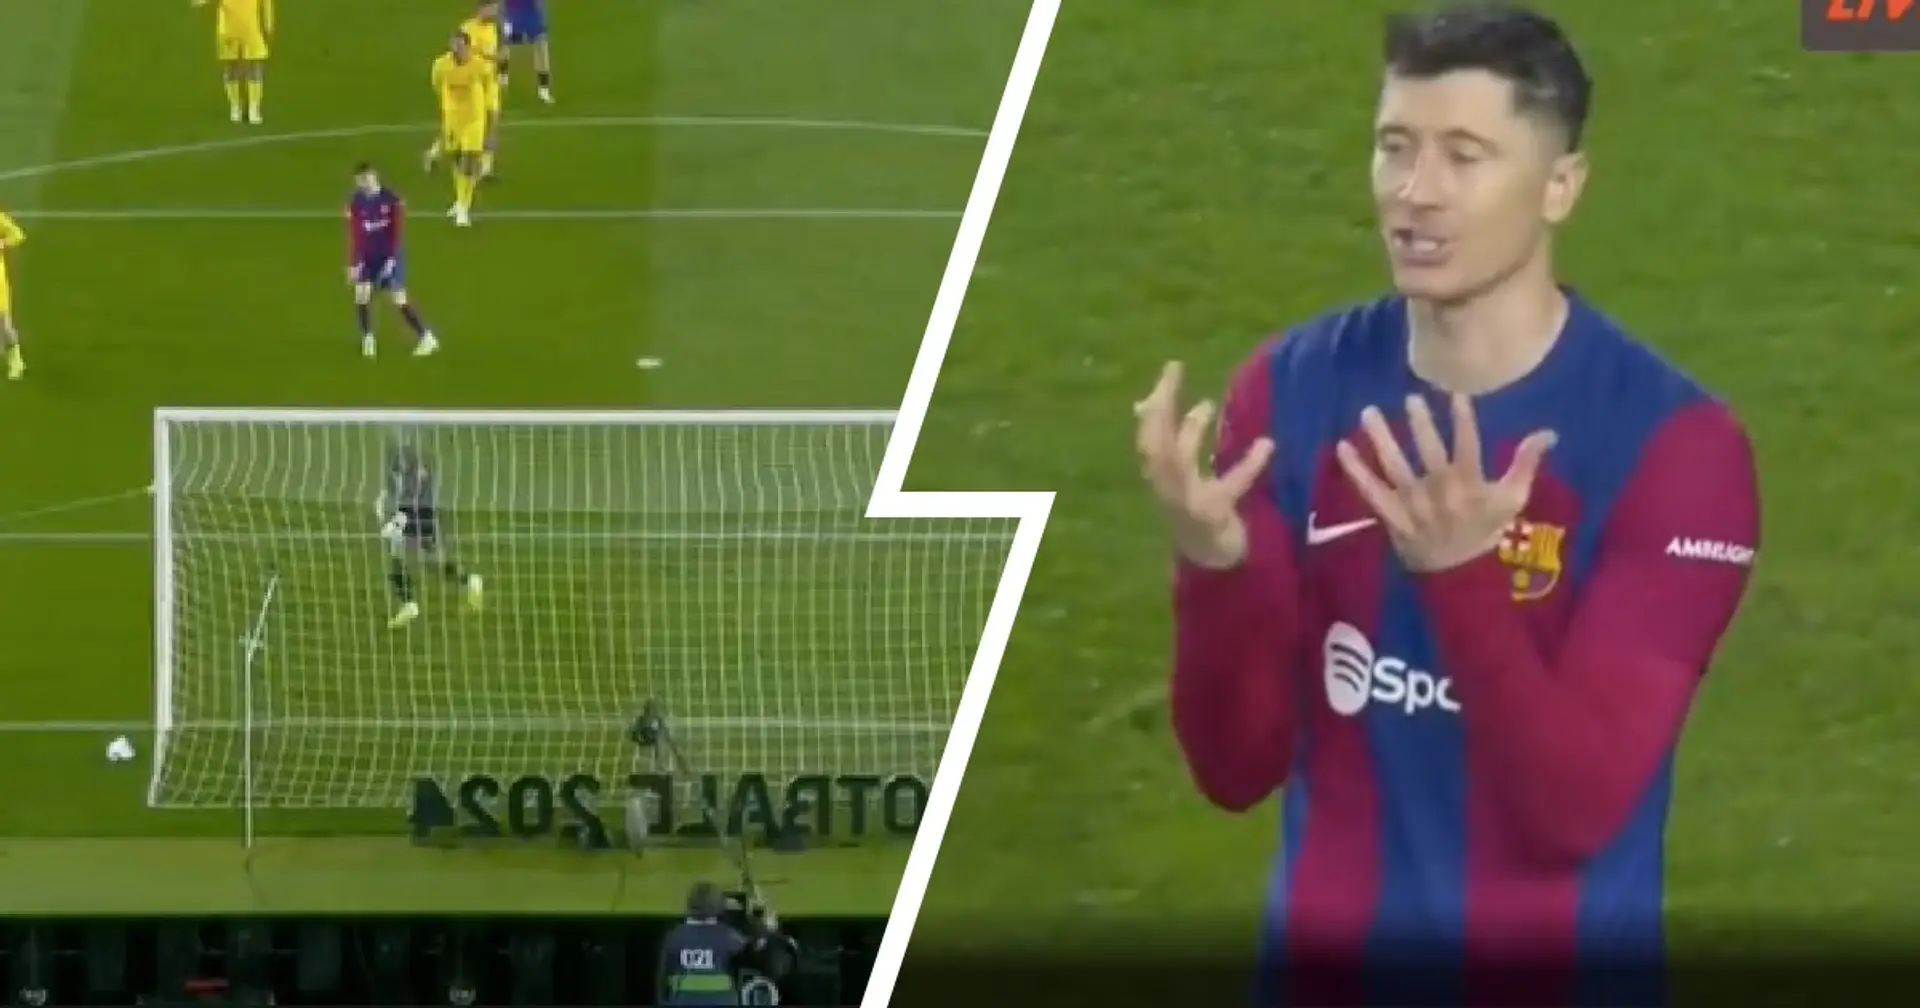 Lewandowski can't believe Fermin didn't pass to him - here's what he did next